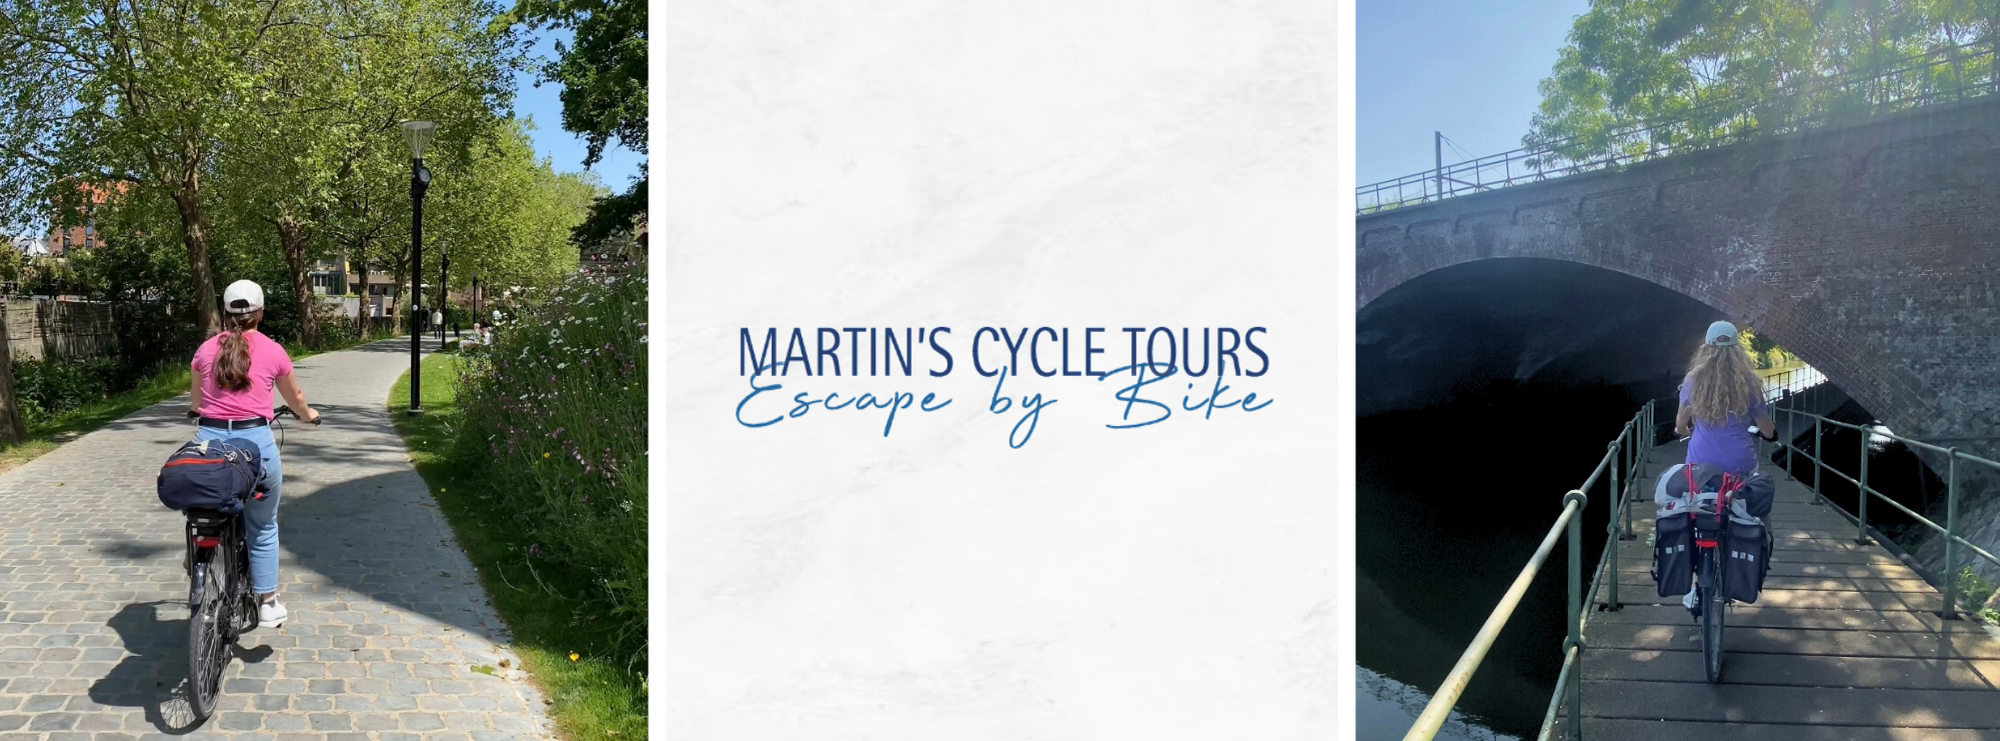 I tested the Martin's Cycle Tours experience for you